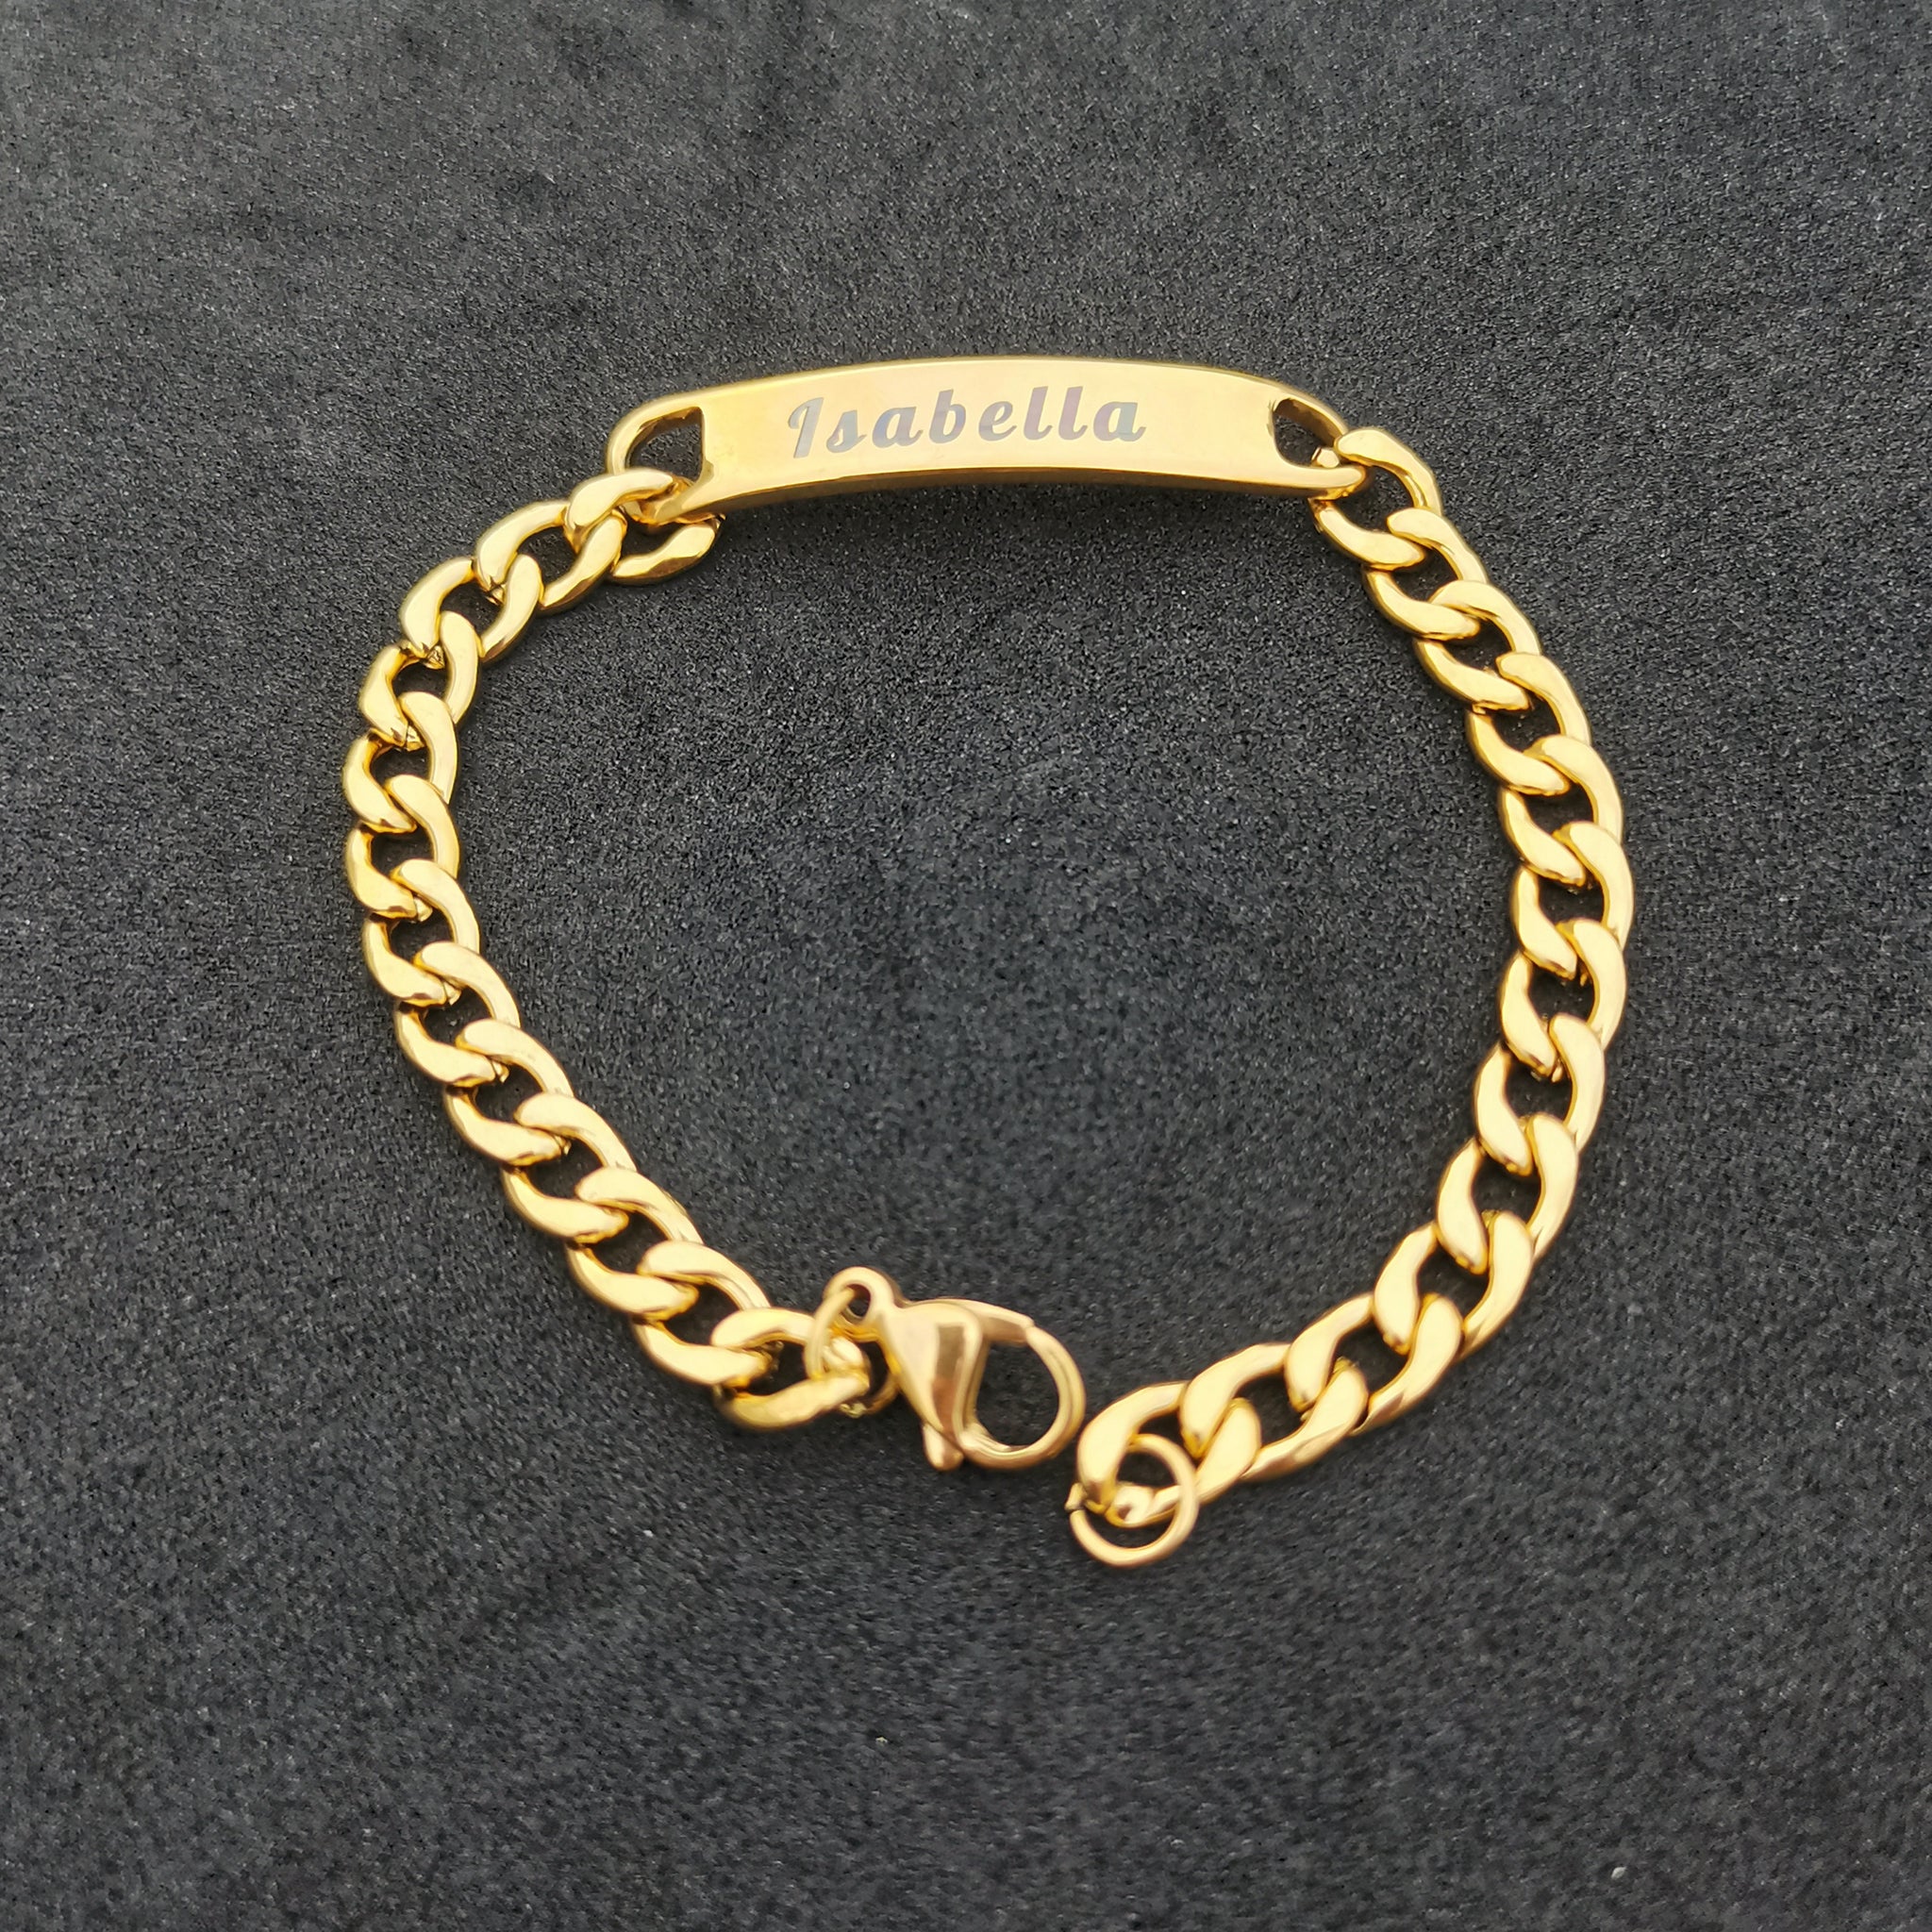 Personalized Name Bracelet With Chain Link